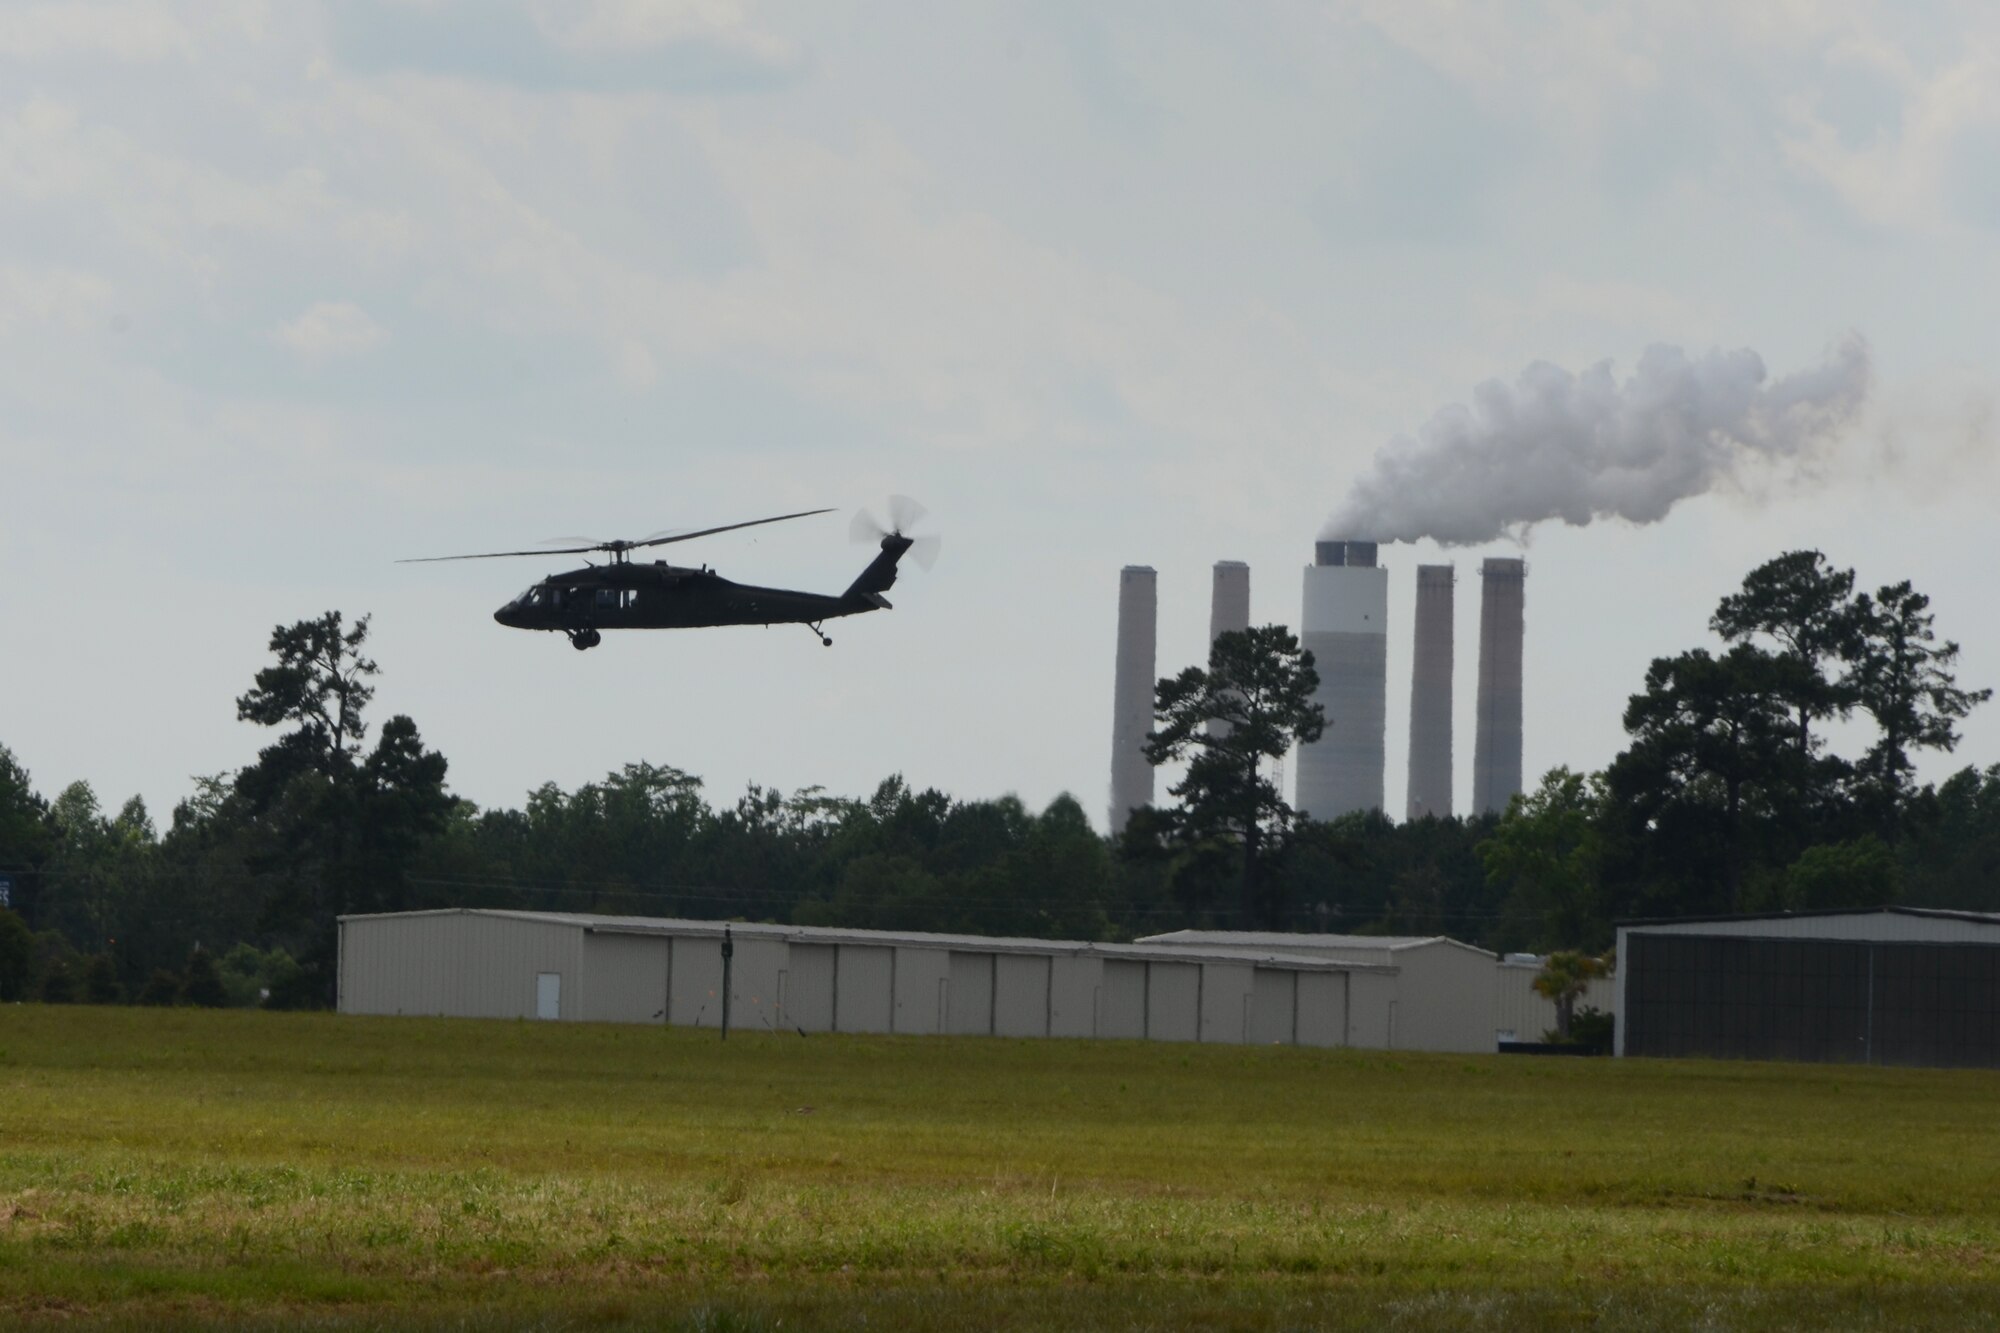 A UH-60 Blackhawk helicopter, supporting the South Carolina Helicopter Aquatic Rescue Team (SC-HART) from the South Carolina Army National Guard, leaves the exercise area at the Georgetown County Airport on June 3, 2014 to participate in a hurricane preparedness exercise with local emergency first responders to kick-off the first week of the hurricane season. Soldiers and Airmen from the South Carolina National Guard work side-by-side with the S.C. Emergency Management Division and first responders from local emergency agencies to effectively respond to any hurricane that may threaten the state. The exercise scenario involved a hurricane post-landfall response between federal, state and local agencies, which includes training in communications and first responder skills, with a focus on how to better protect and assist citizens during emergency situations. (U.S. Air National Guard photo by Senior Master Sgt. Edward Snyder/Released)